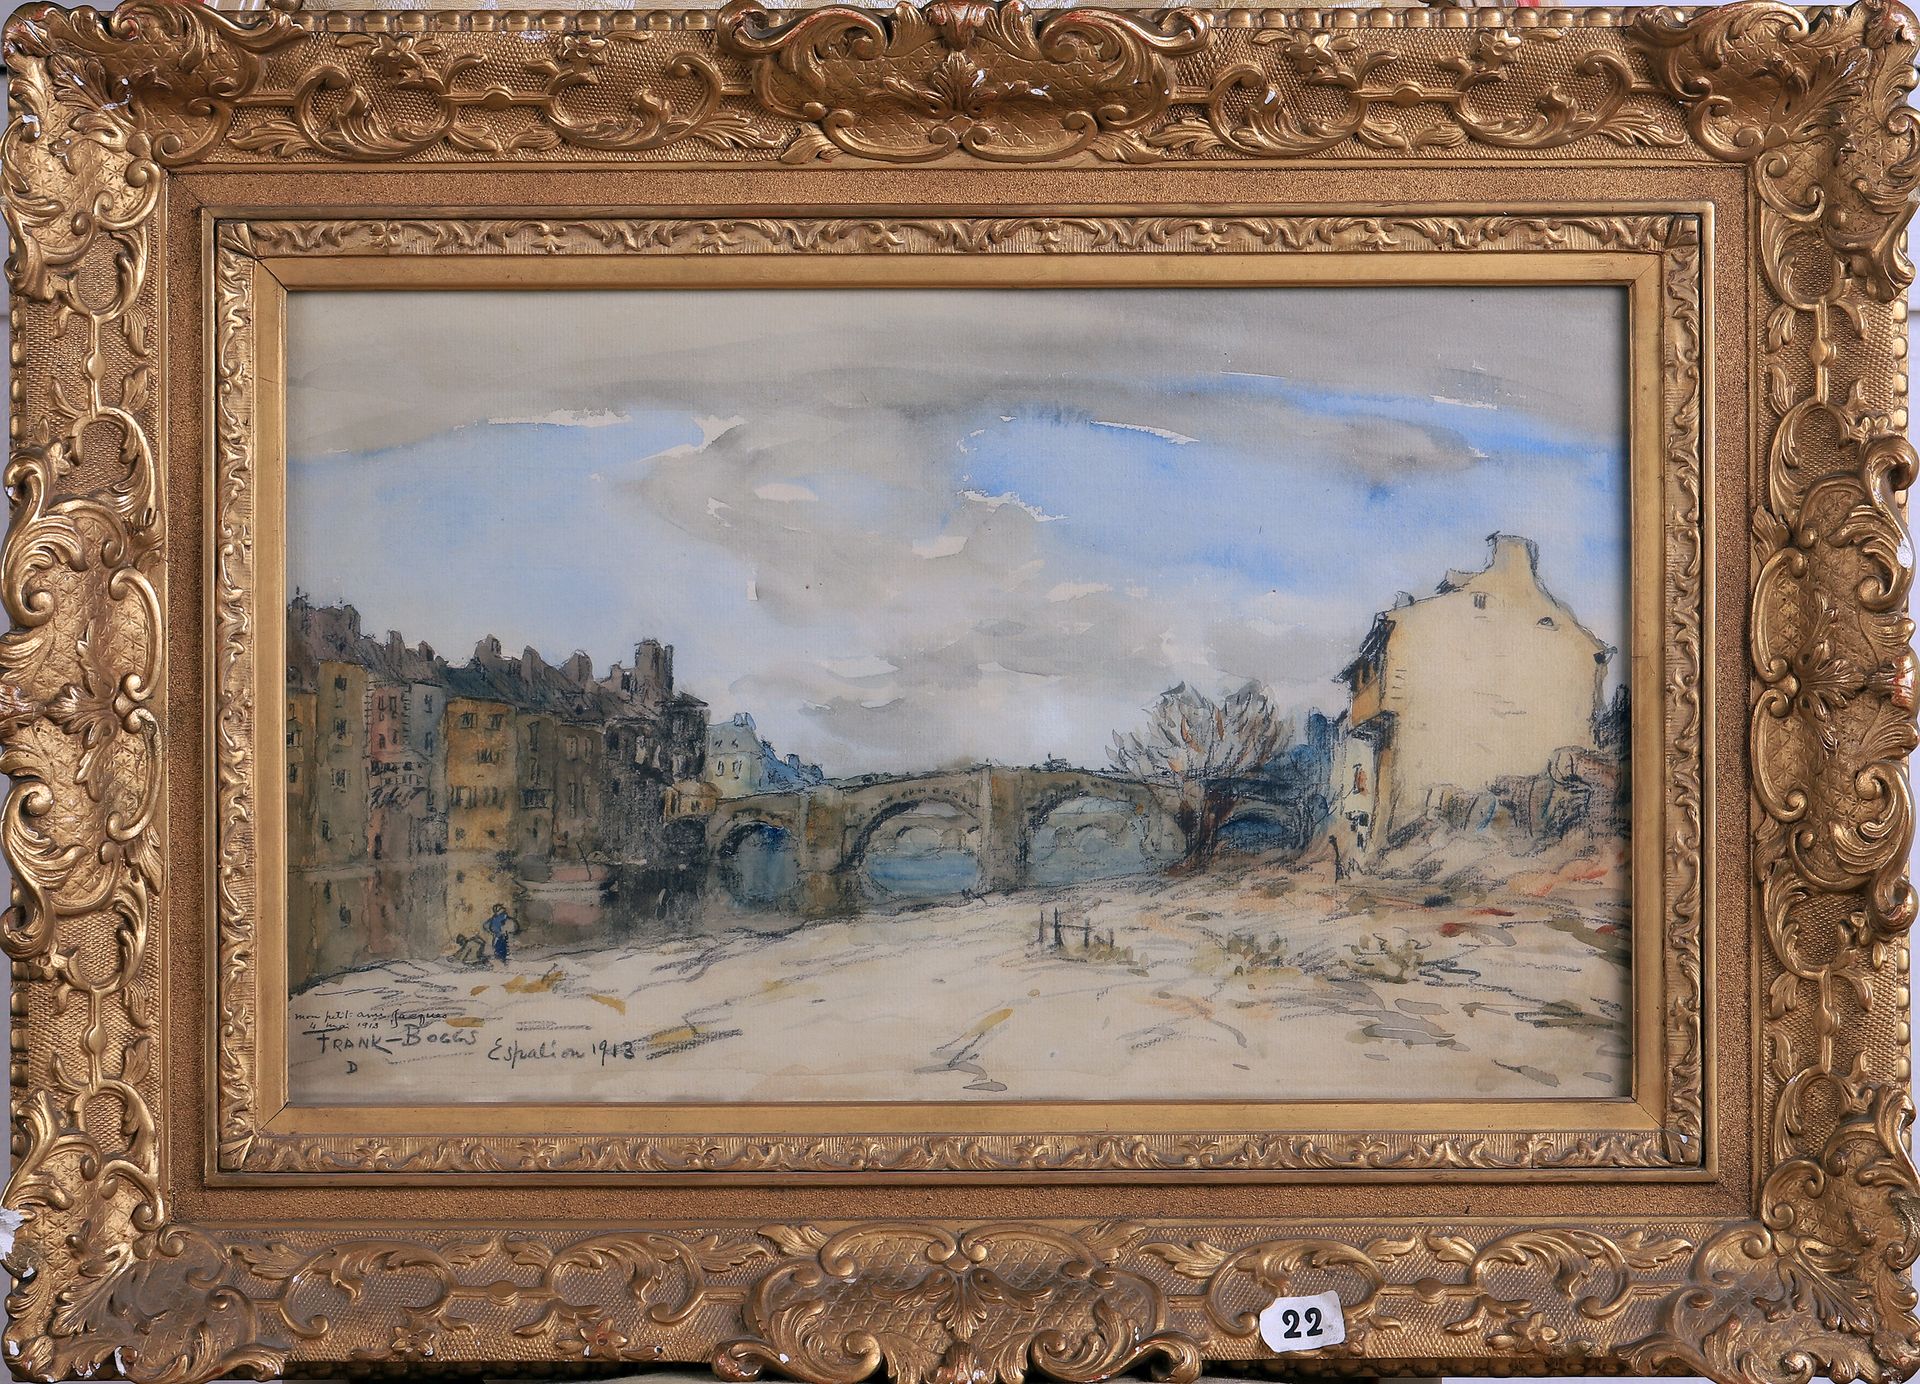 Null FRANK BOGGS (1855-1926)

Espalion

Watercolor, signed, located and dated "E&hellip;